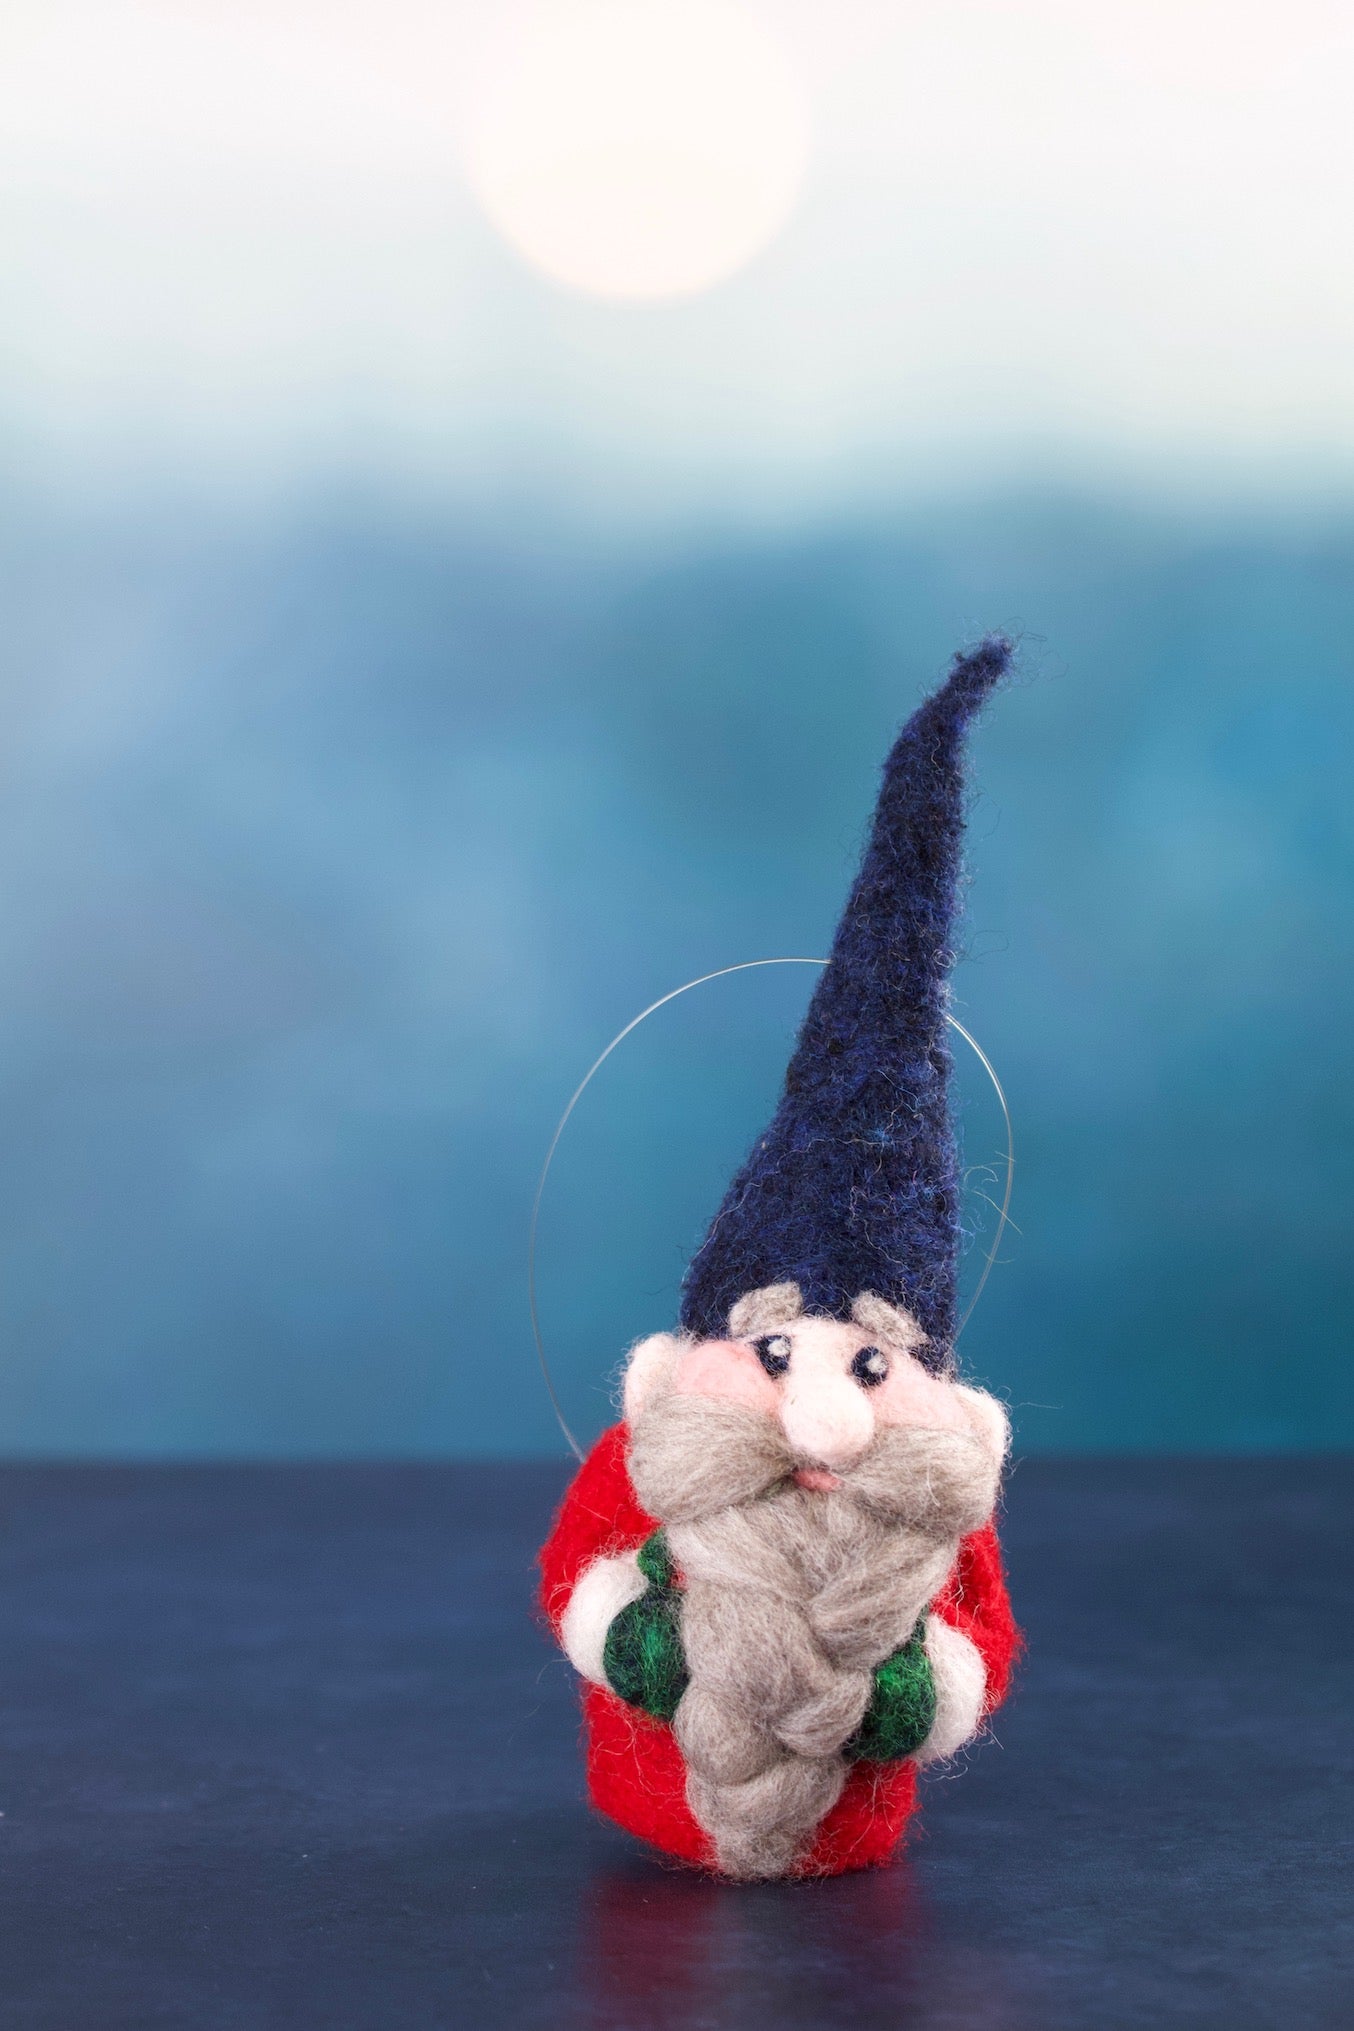 Felted Wool Gnomes-Thimble & Thyme-Material_Wool,Theme_Christmas,Theme_Fall,Theme_Thanksgiving,Theme_Woodland